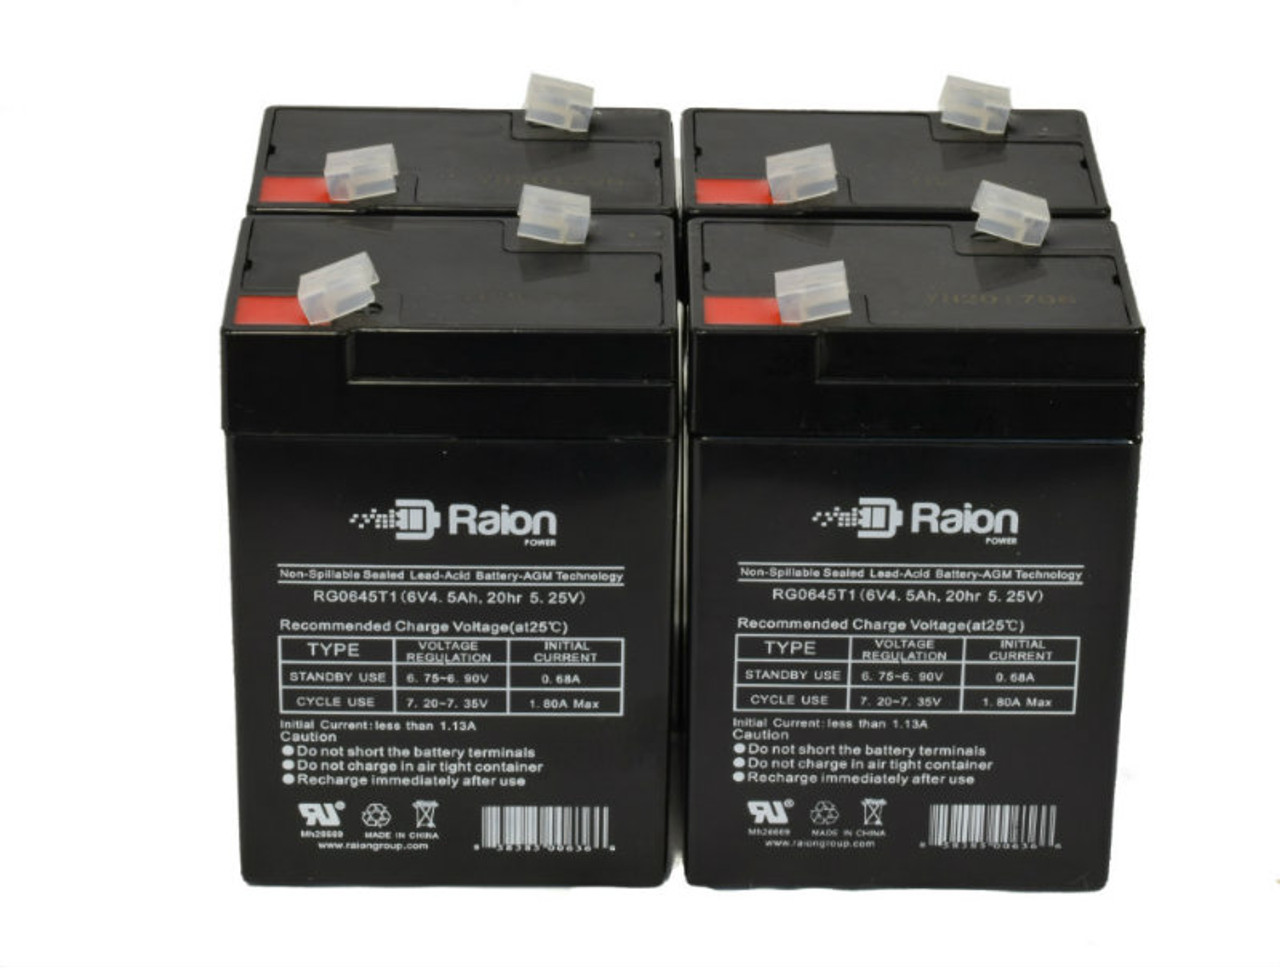 Raion Power 6V 4.5Ah Replacement Emergency Light Battery for Edwards 1637 - 4 Pack